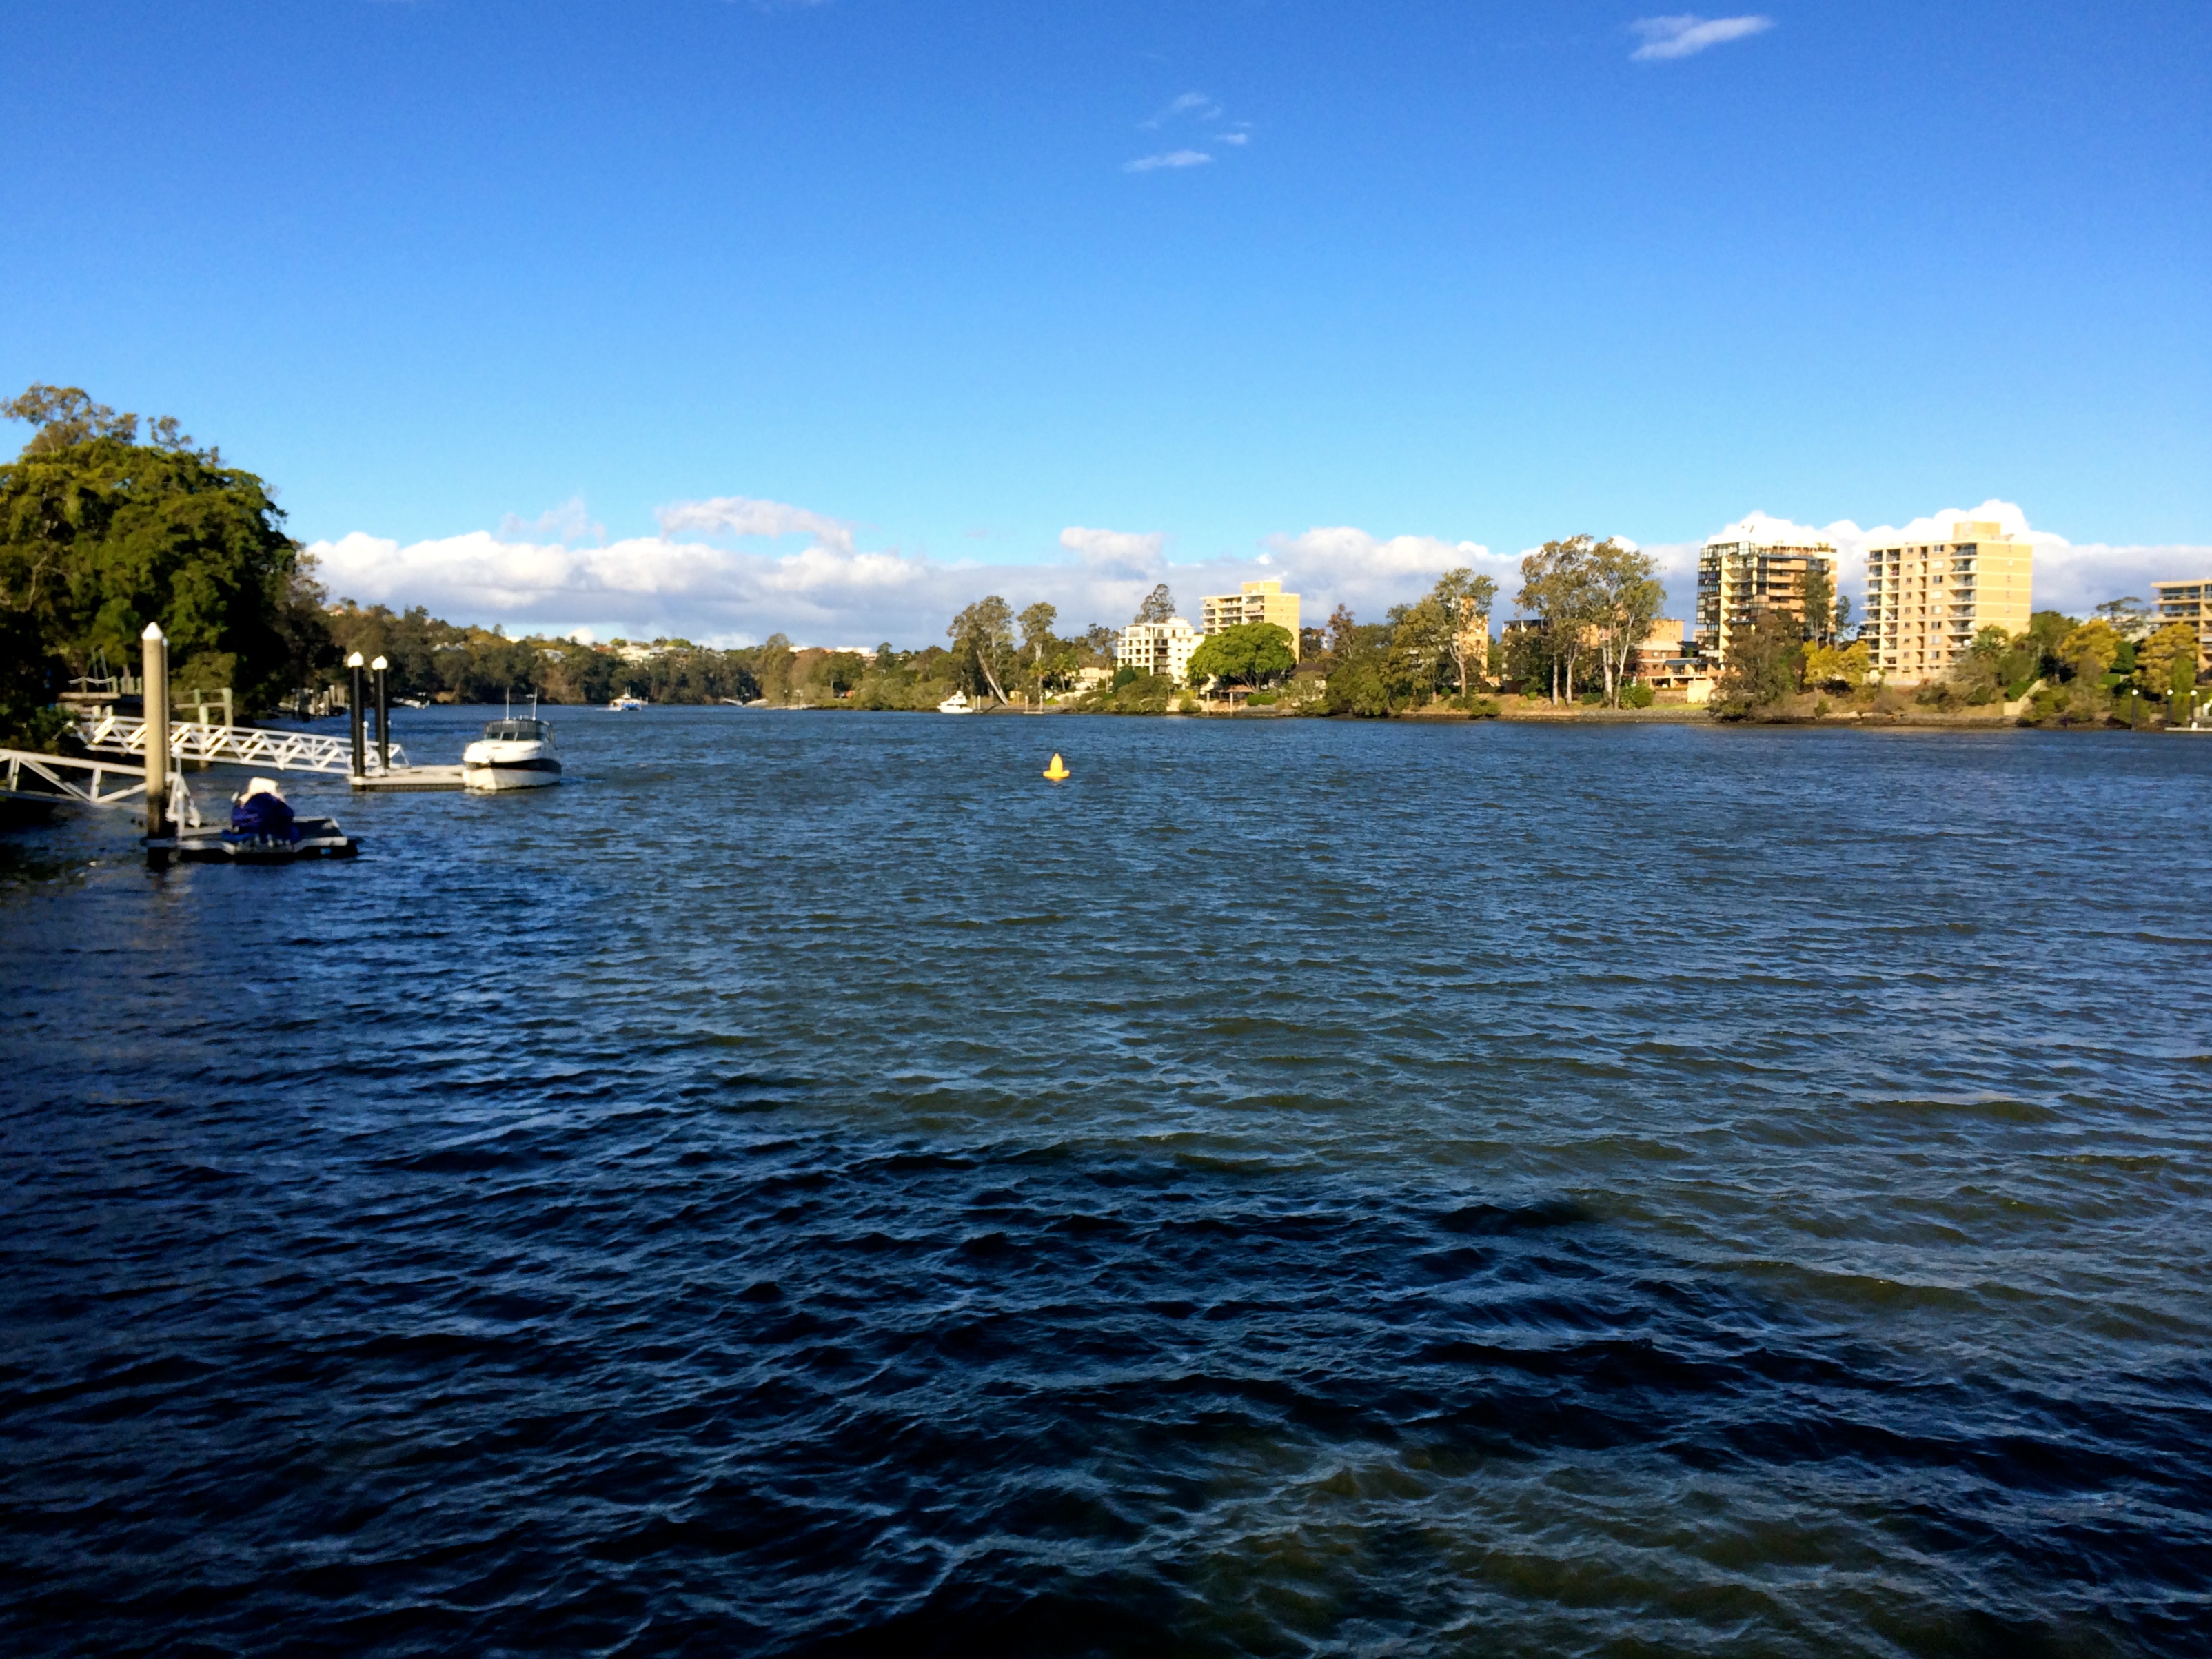 Brisbane River, West End Ferry Wharf, Recorded at 3pm on August 14th 2014.